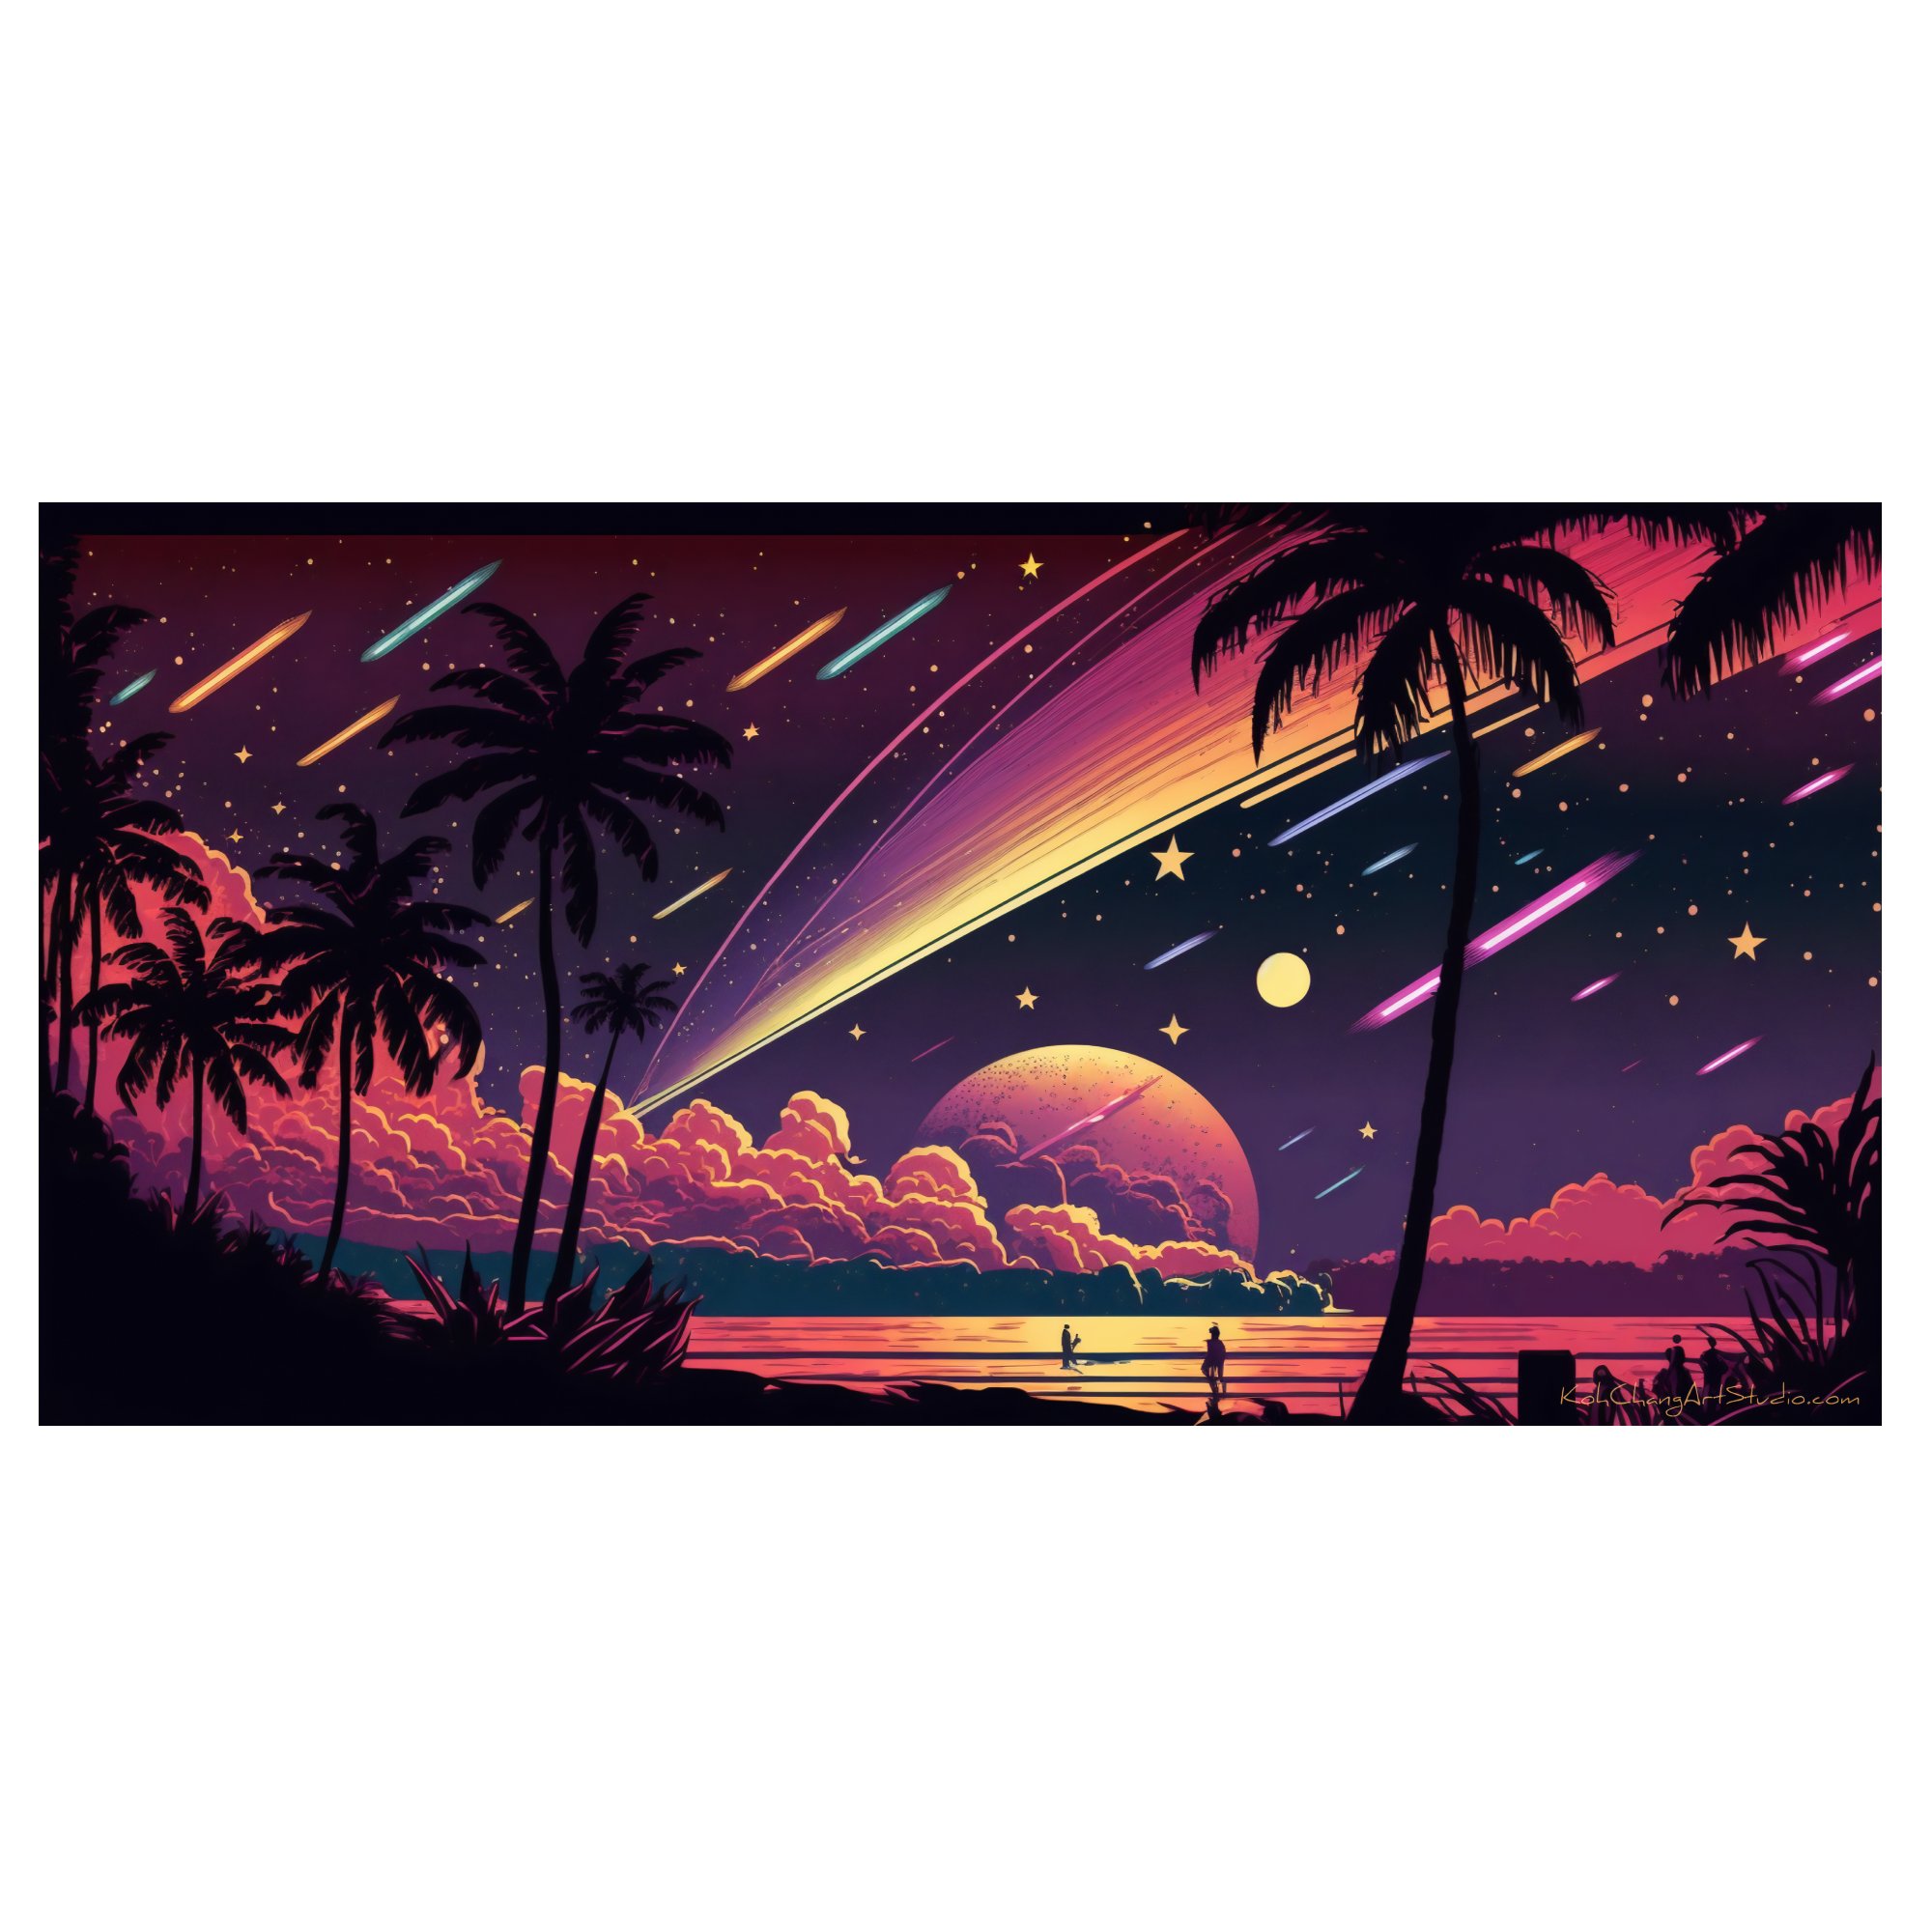 UNREAL HORIZON Art Design - Glowing moon framed by massive clouds over a calm sea, dotted with shooting stars.